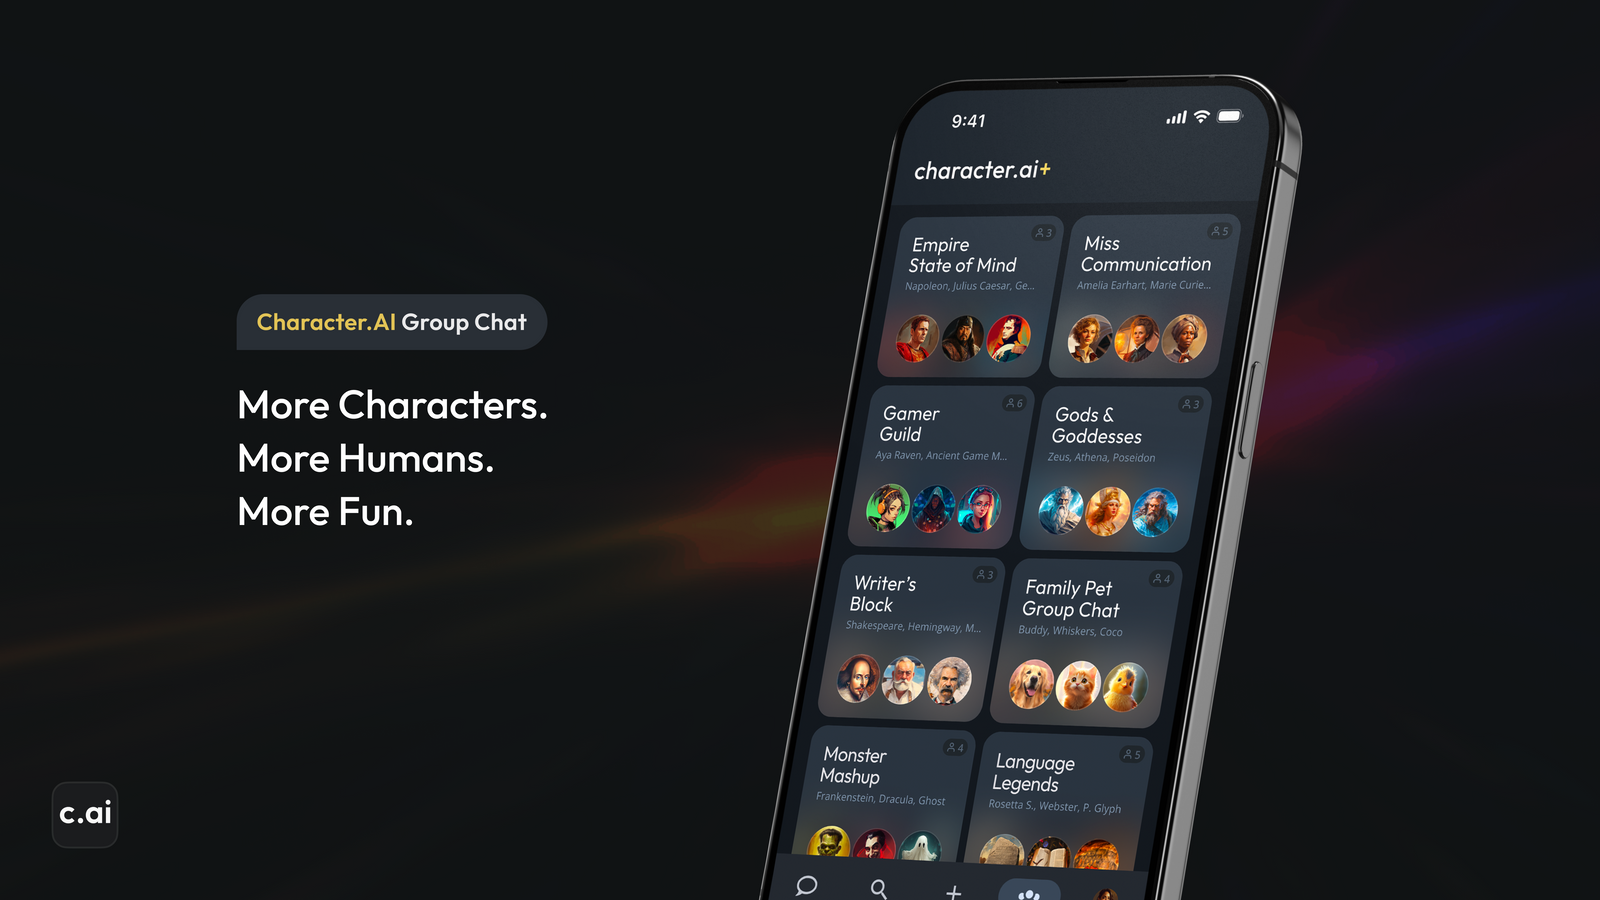 Character.AI introduces group chats where people and multiple AIs can talk to each other